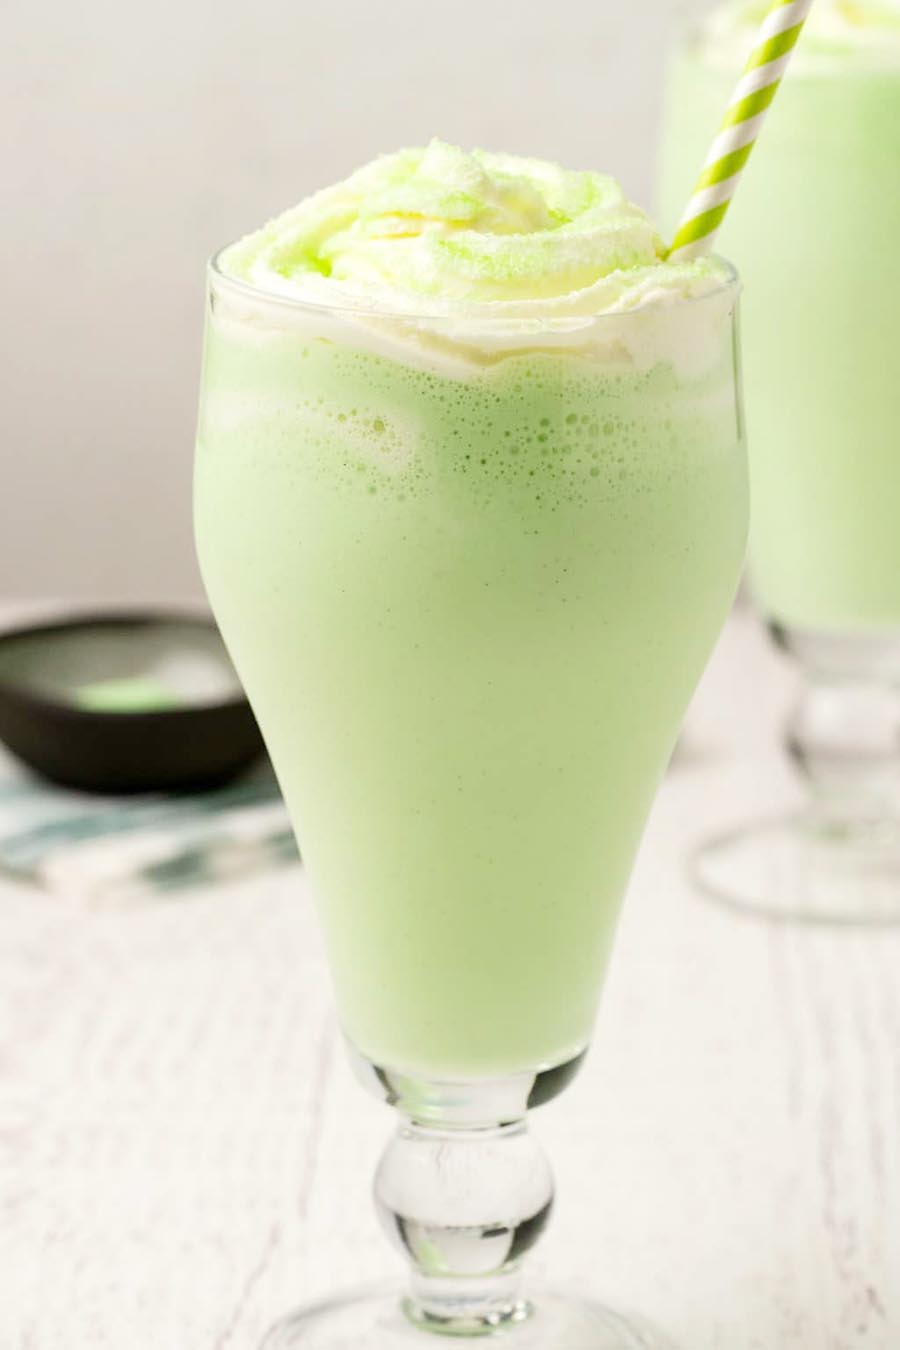 Two shamrock shakes in glasses with striped straws